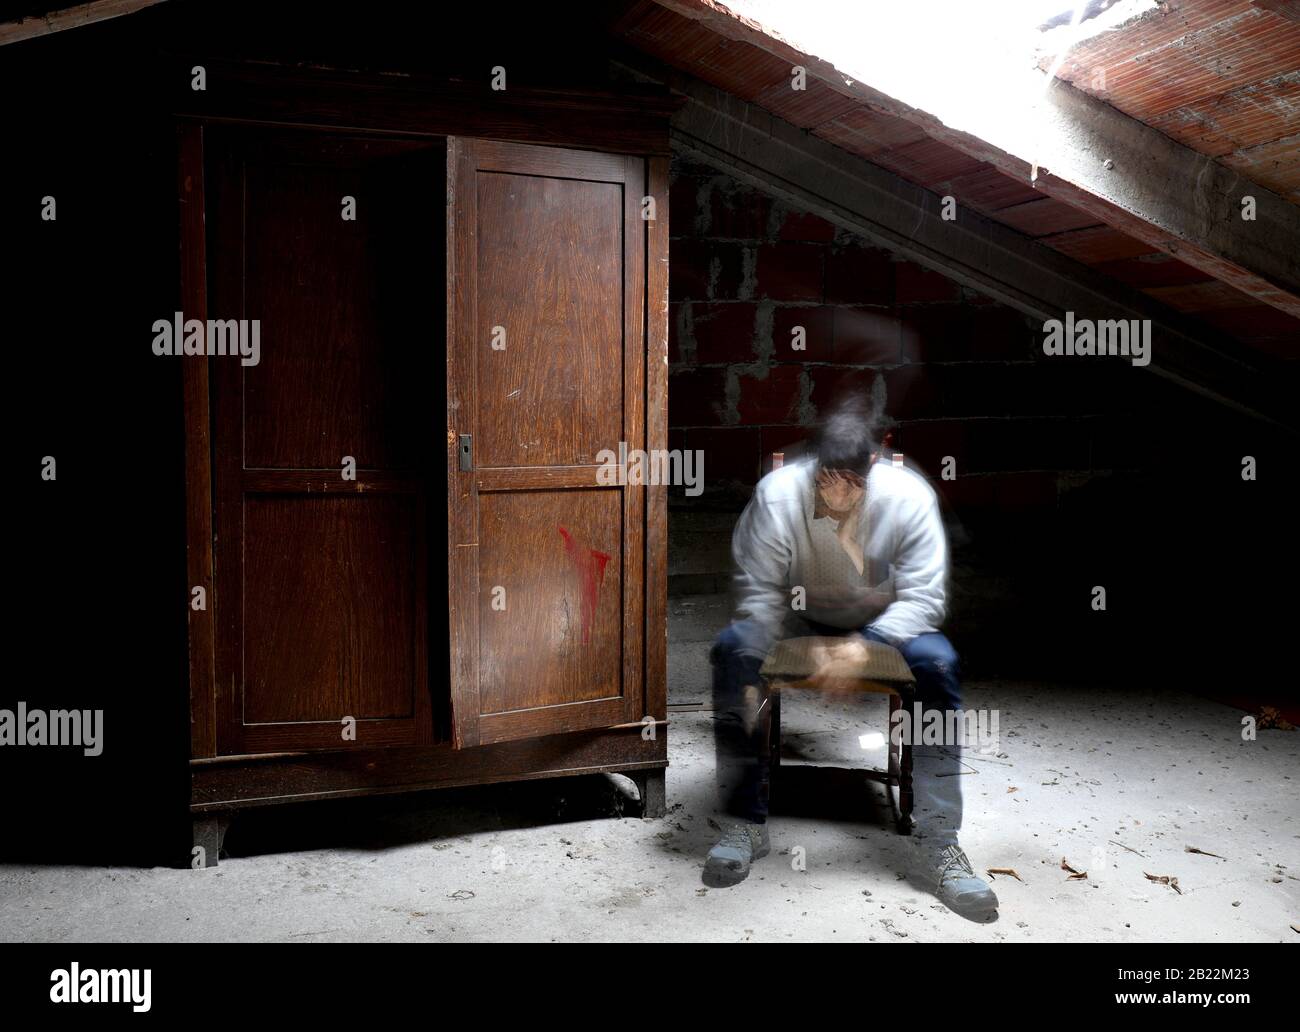 desperate spectral man on the chair in the attic with wooden wardrobe Stock Photo